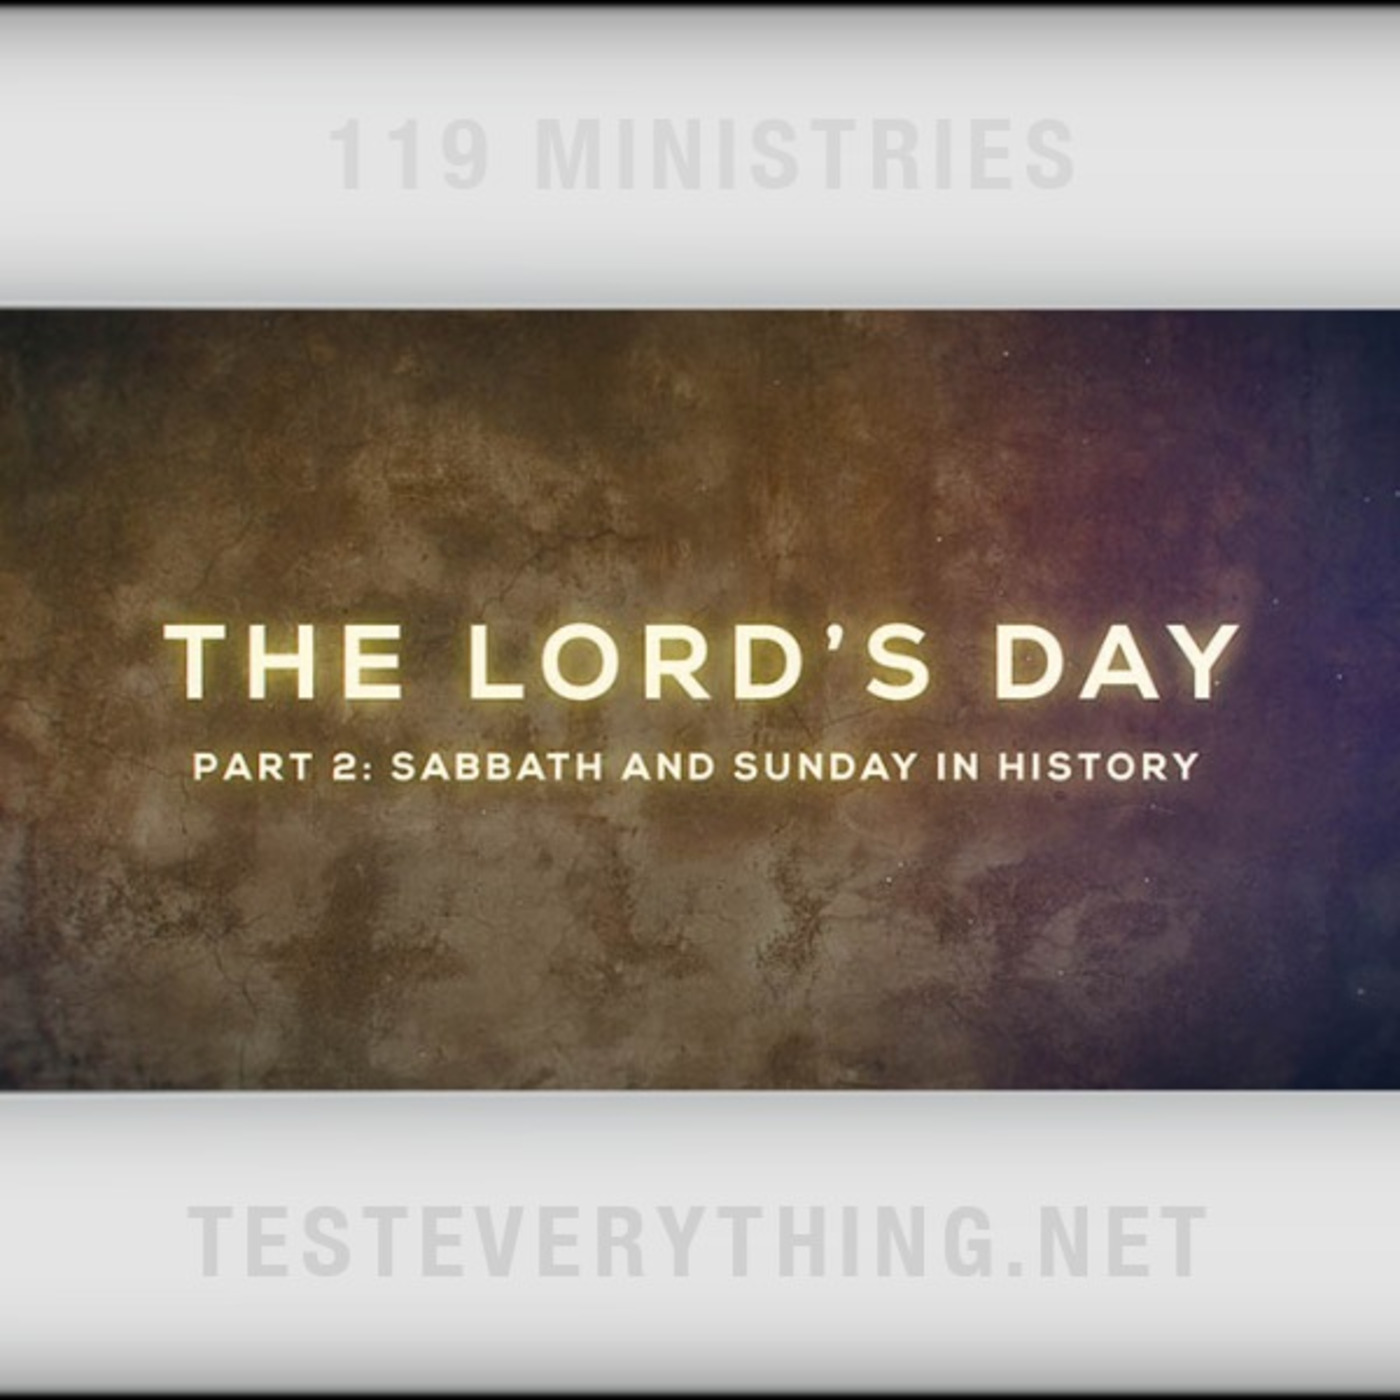 Episode 511: TE: The Lord's Day Part 2 - Sabbath and Sunday in History